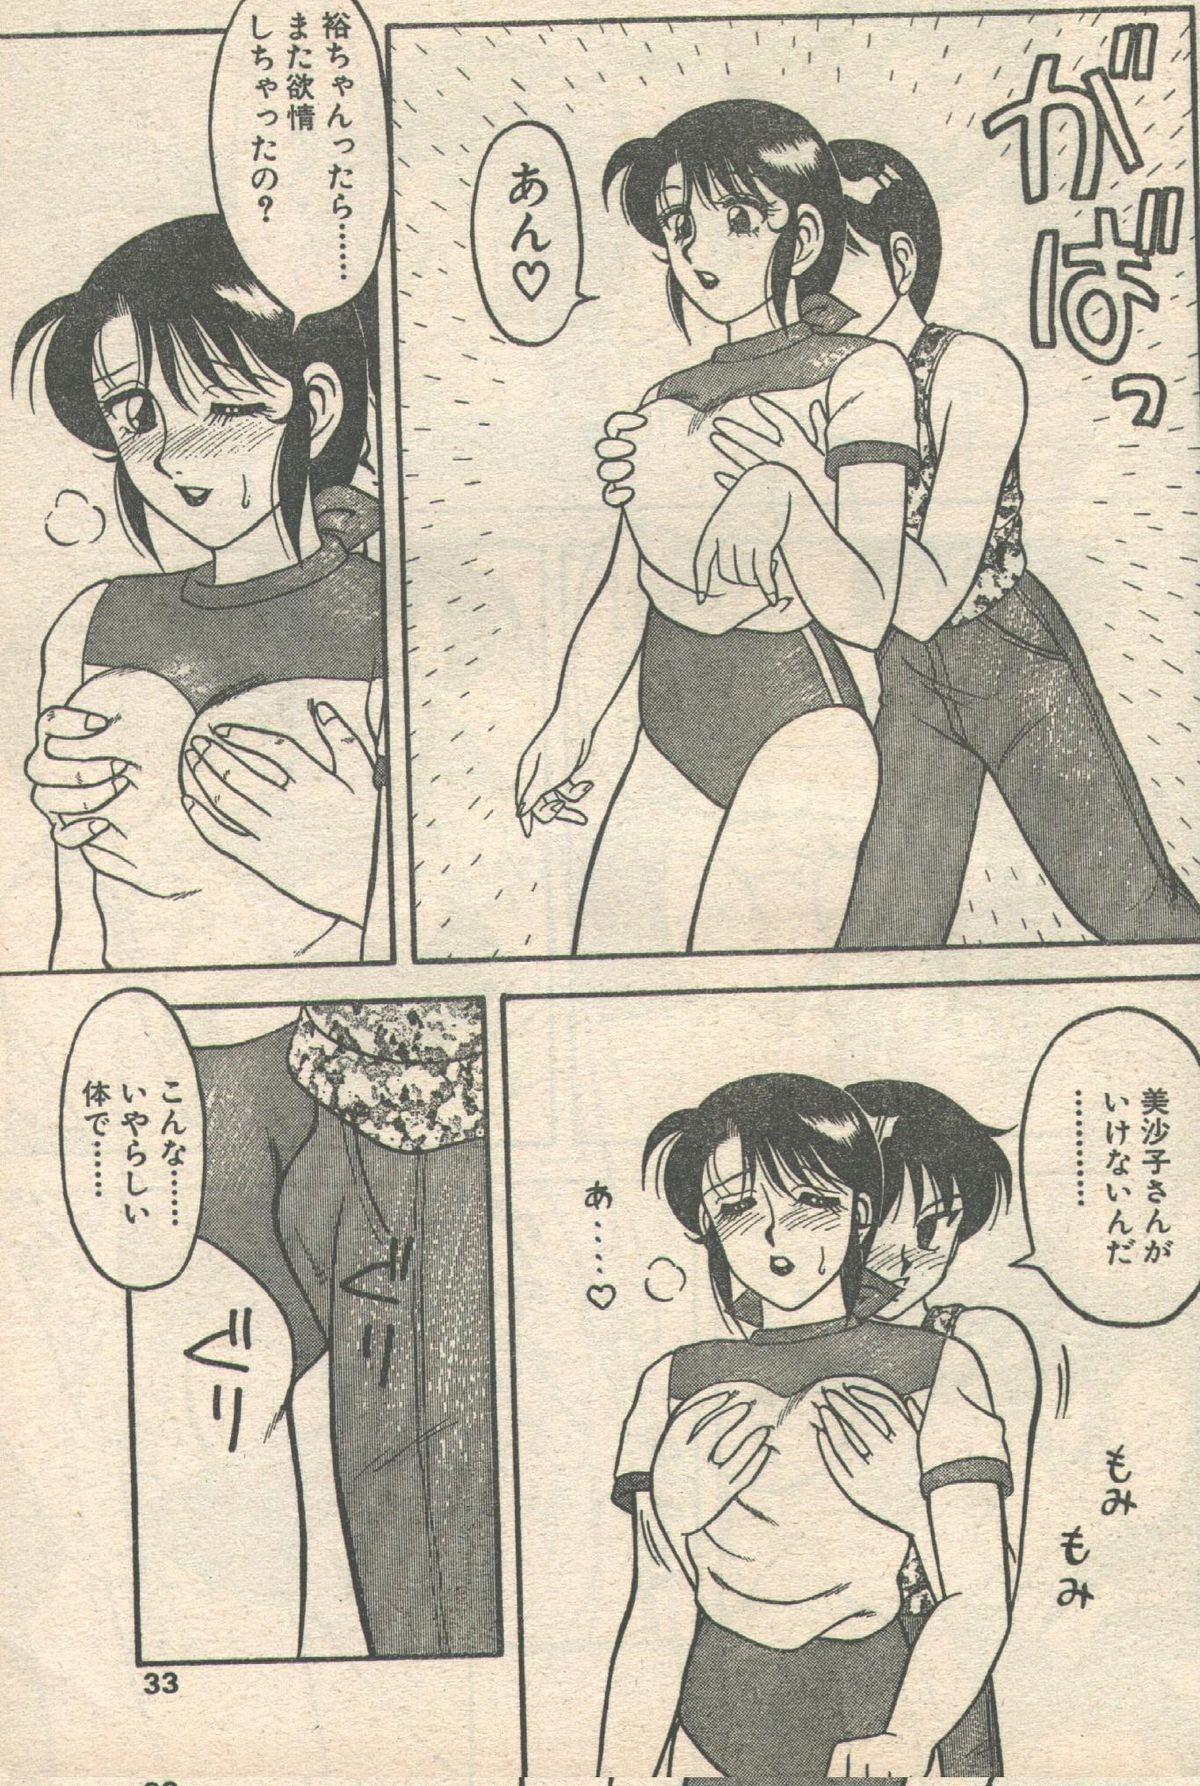 Caliente Candy Time 1992-09 Corrida - Page 9